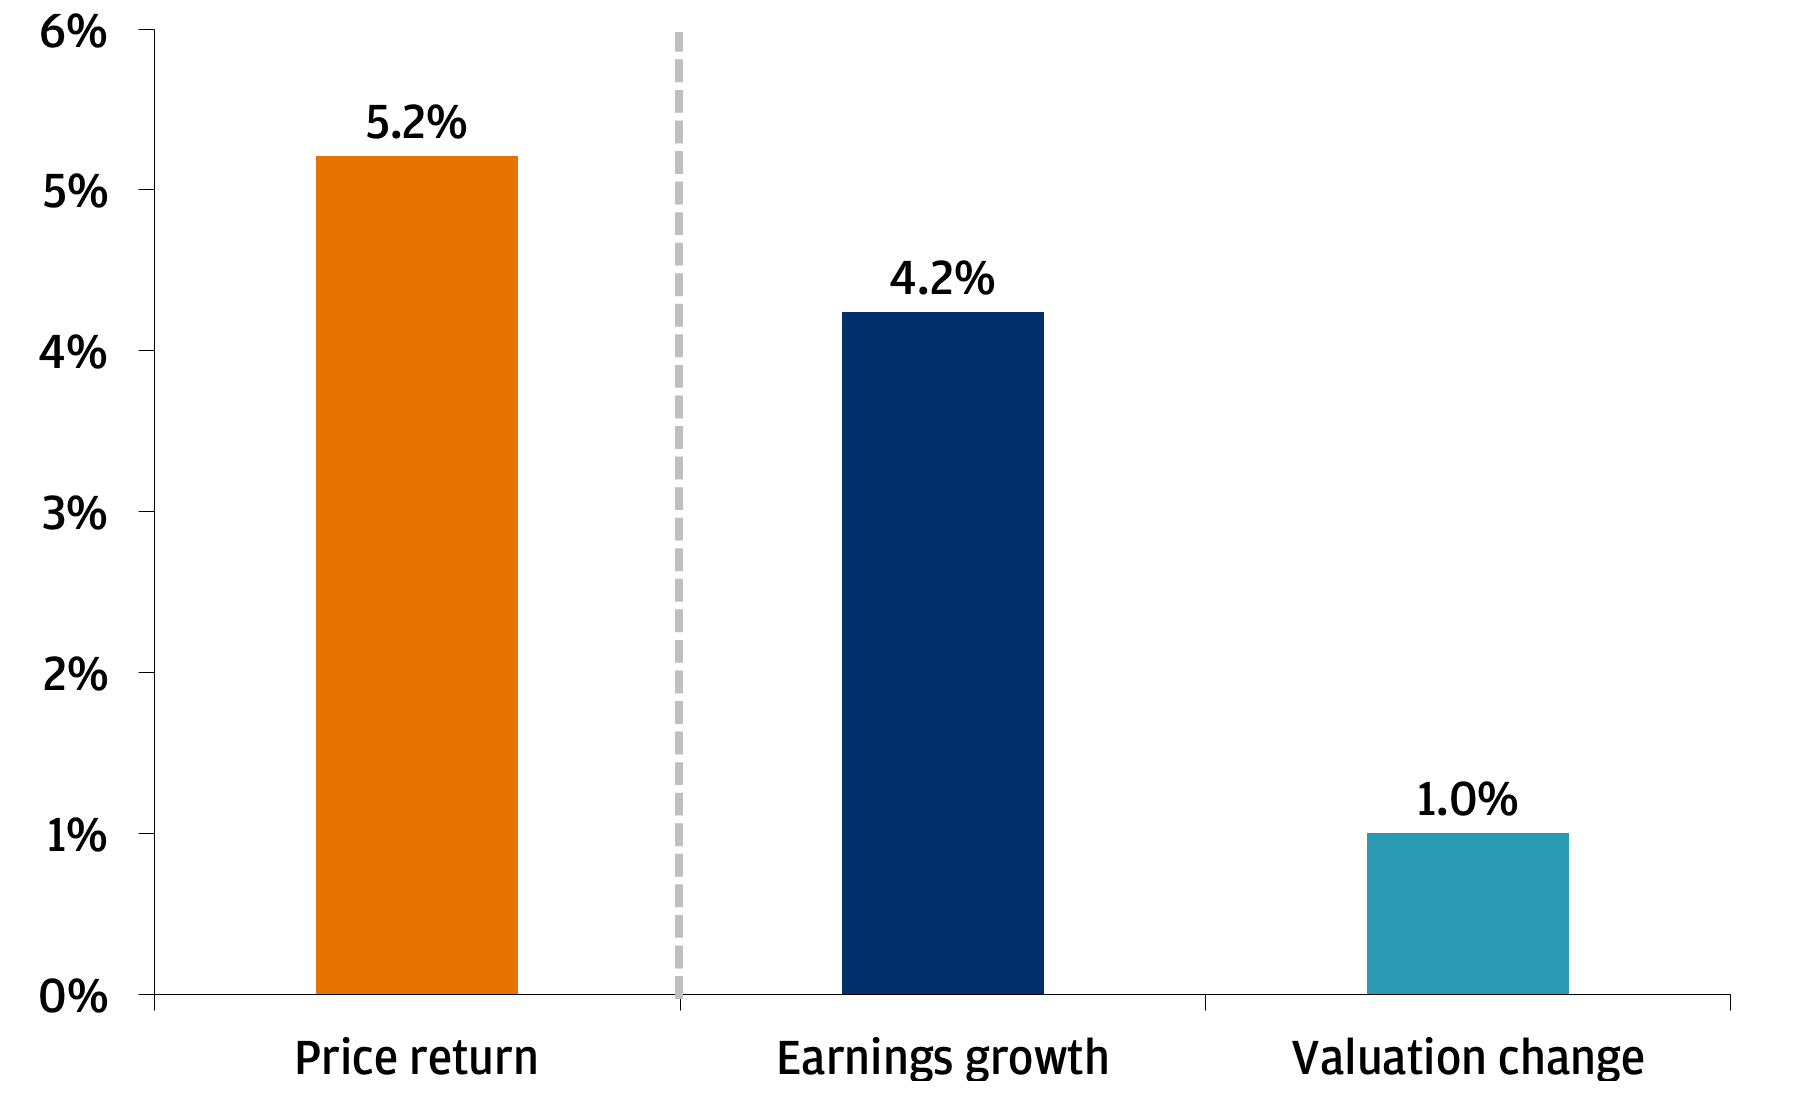 This chart shows S&P 500 2024 year-to-date price return, earnings growth and valuation change. The price return is 5.2%, earnings growth is 4.2%, and the valuation change is 1.0%. 